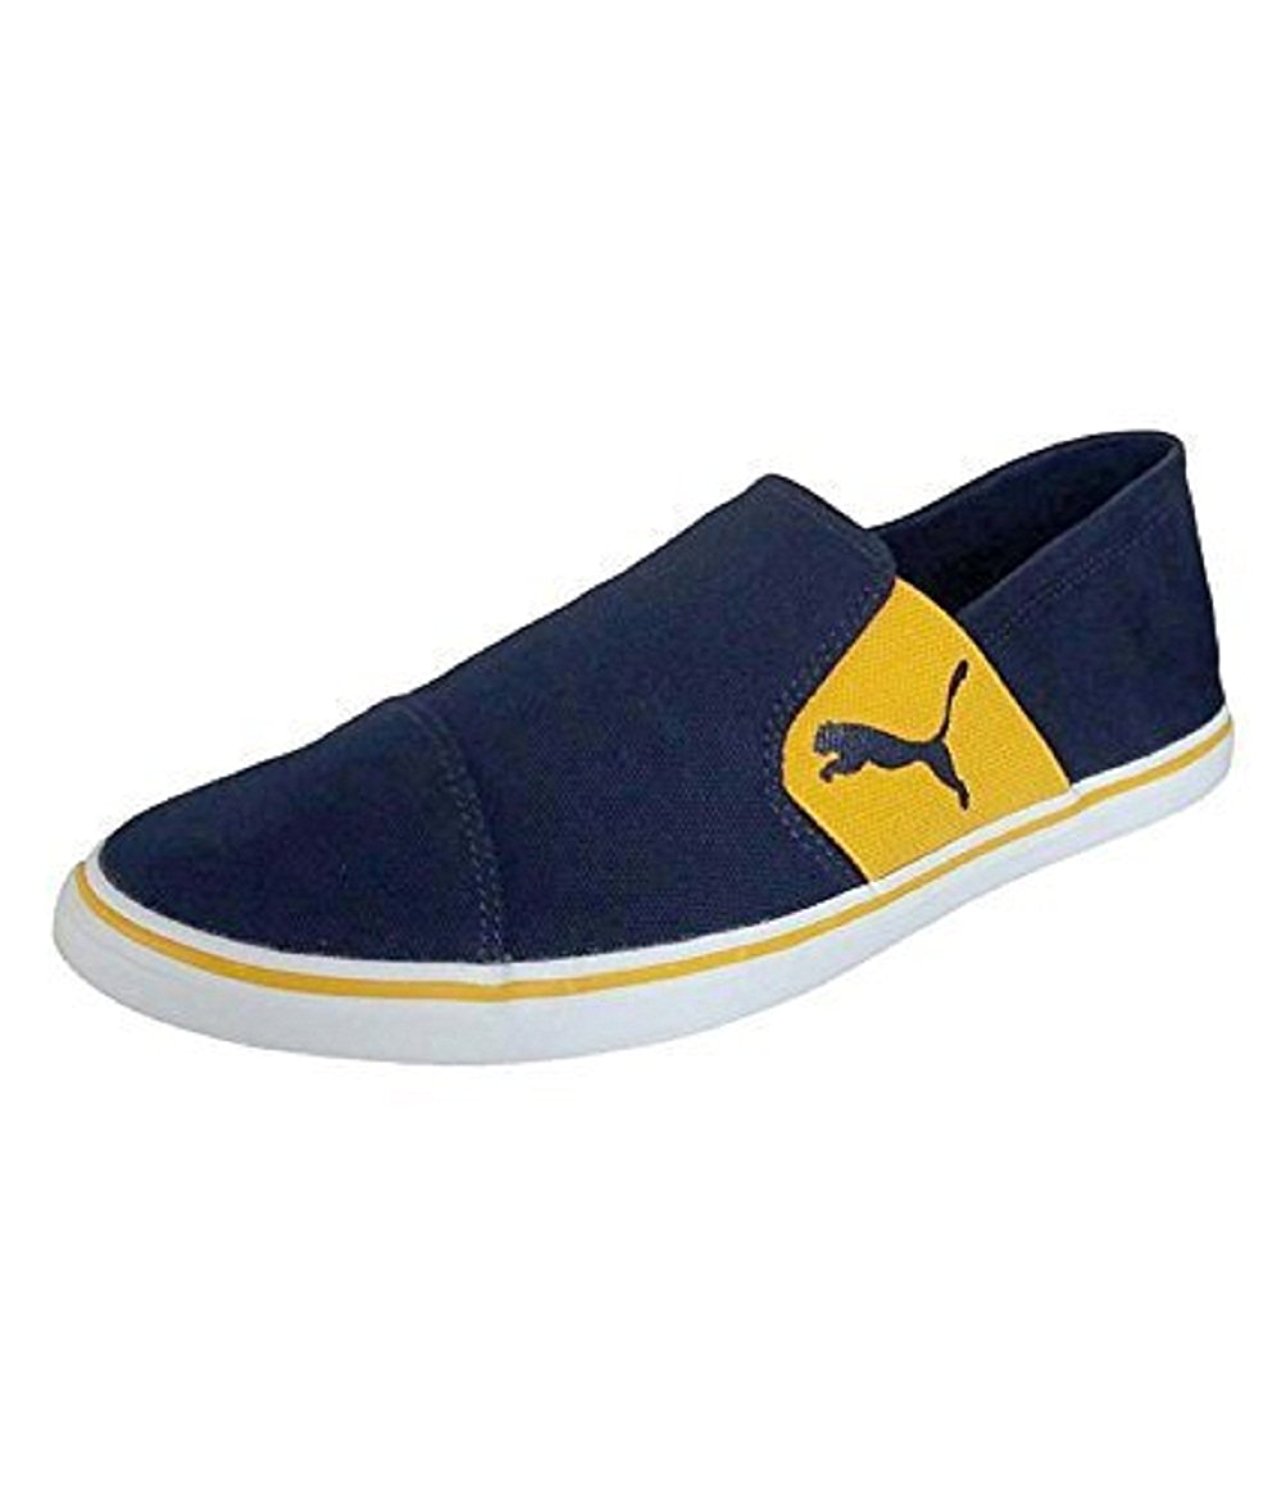 puma loafers for women